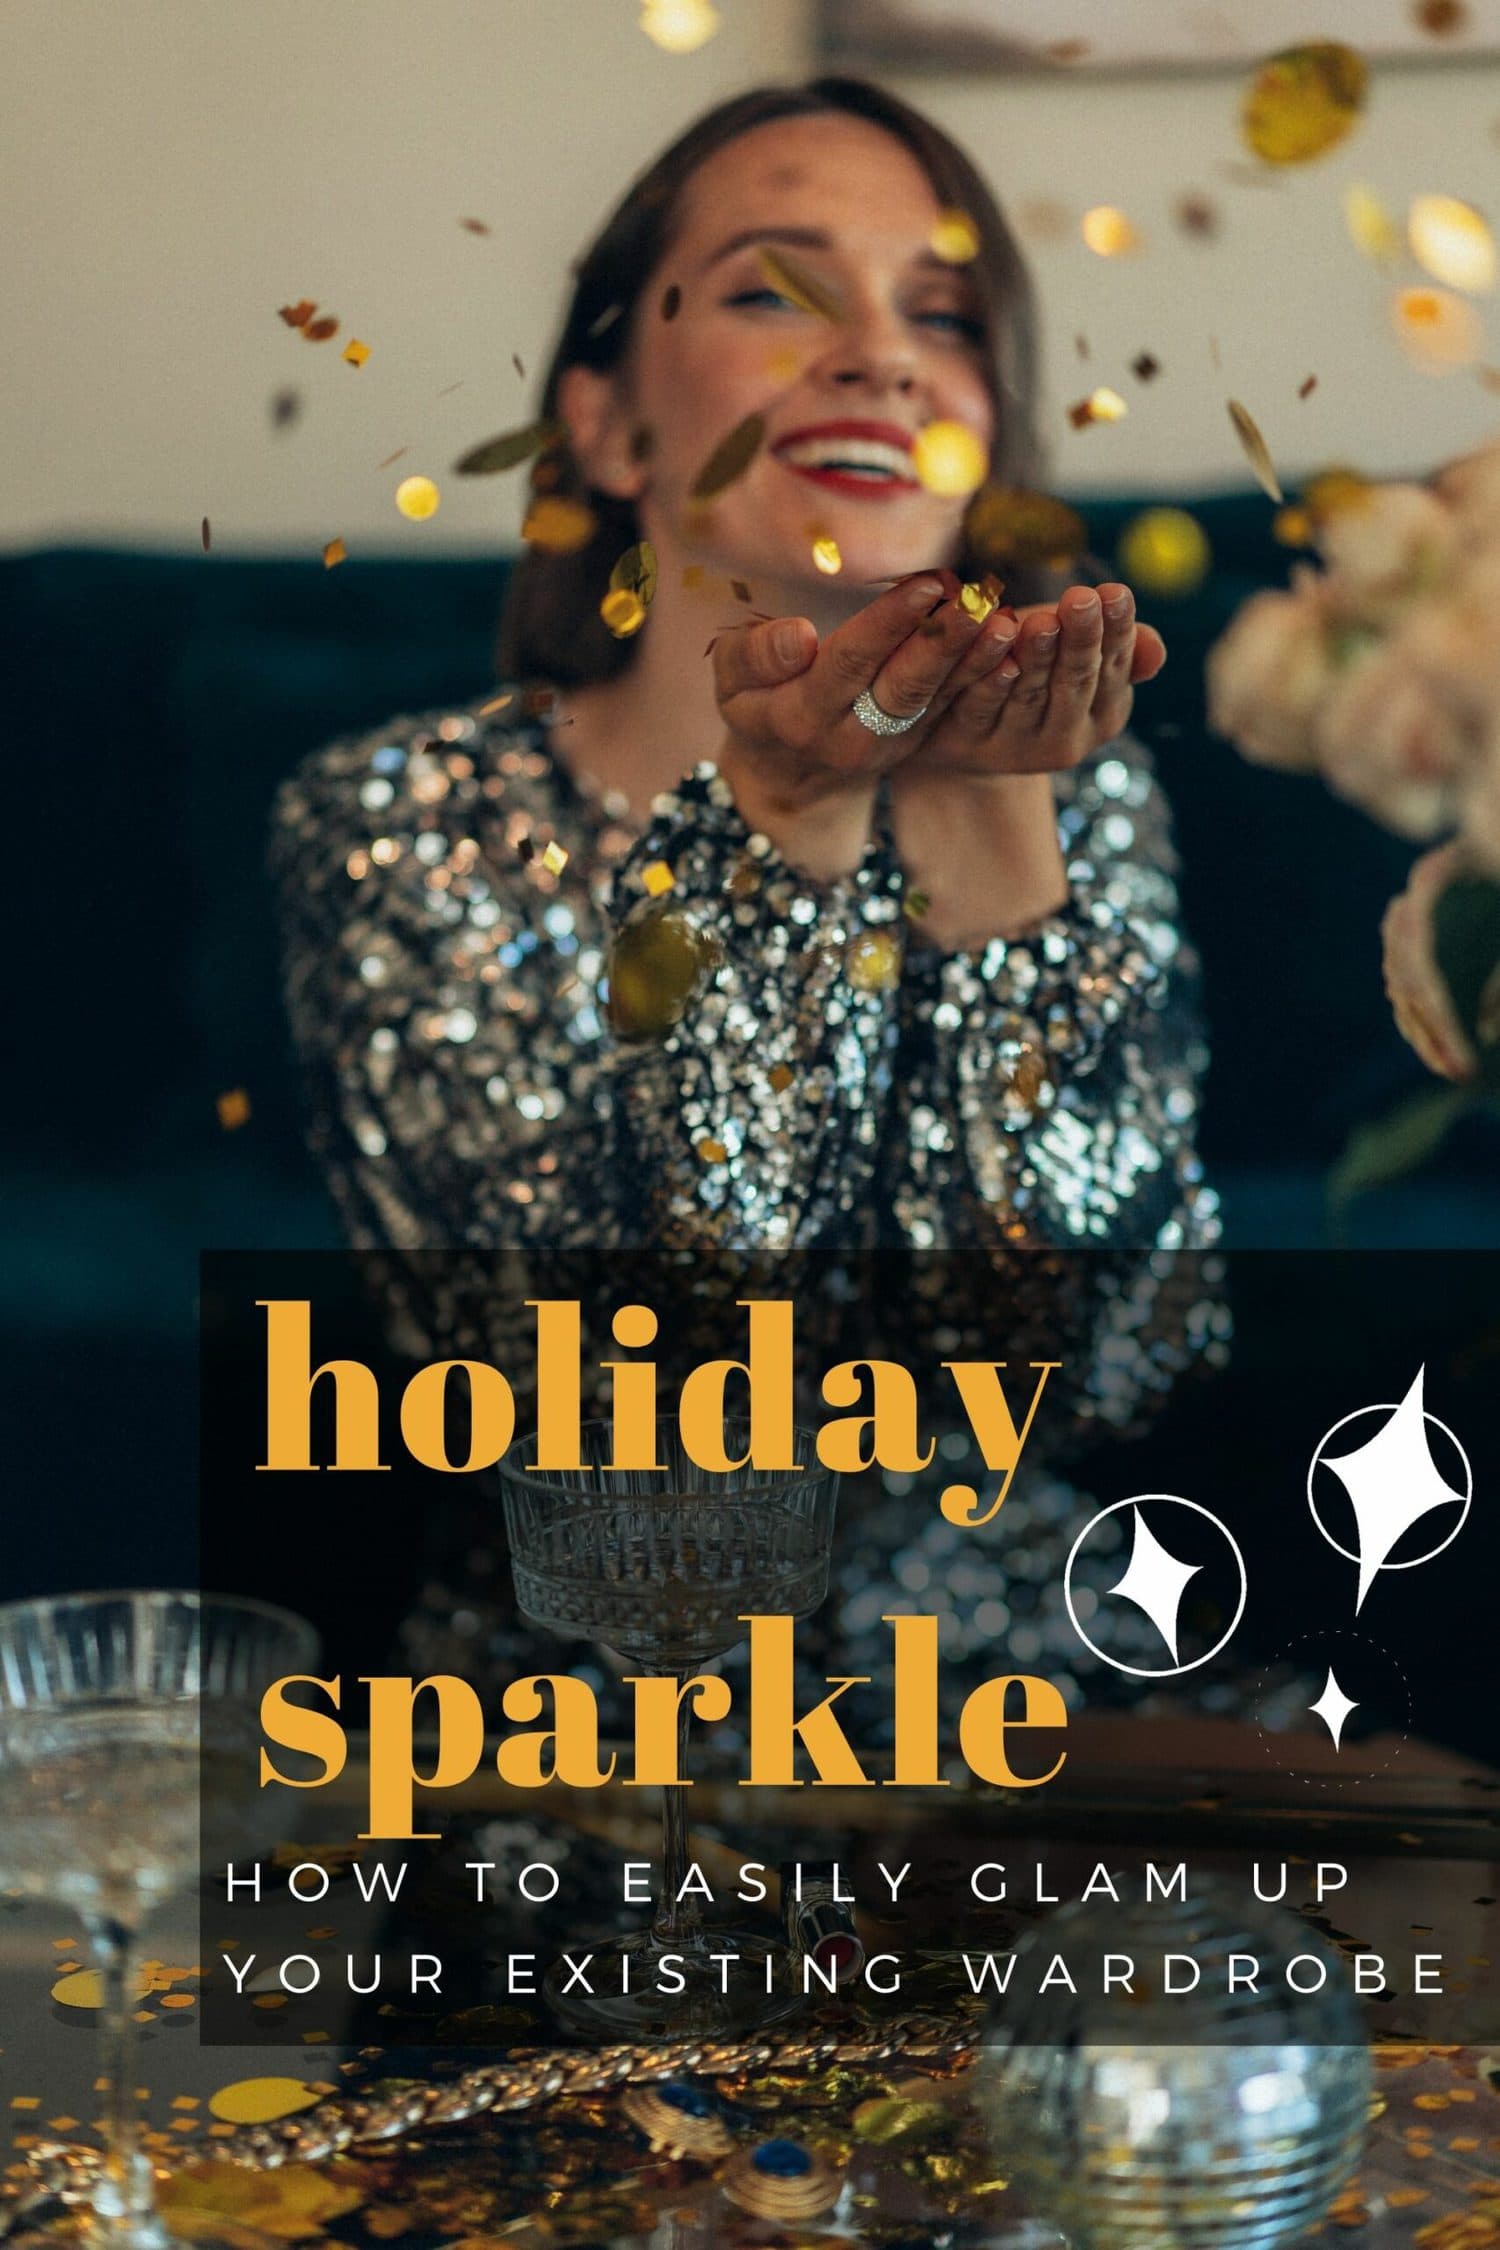 How to Glam Up Your Existing Wardrobe for the Holidays: The Single Sparkly Piece